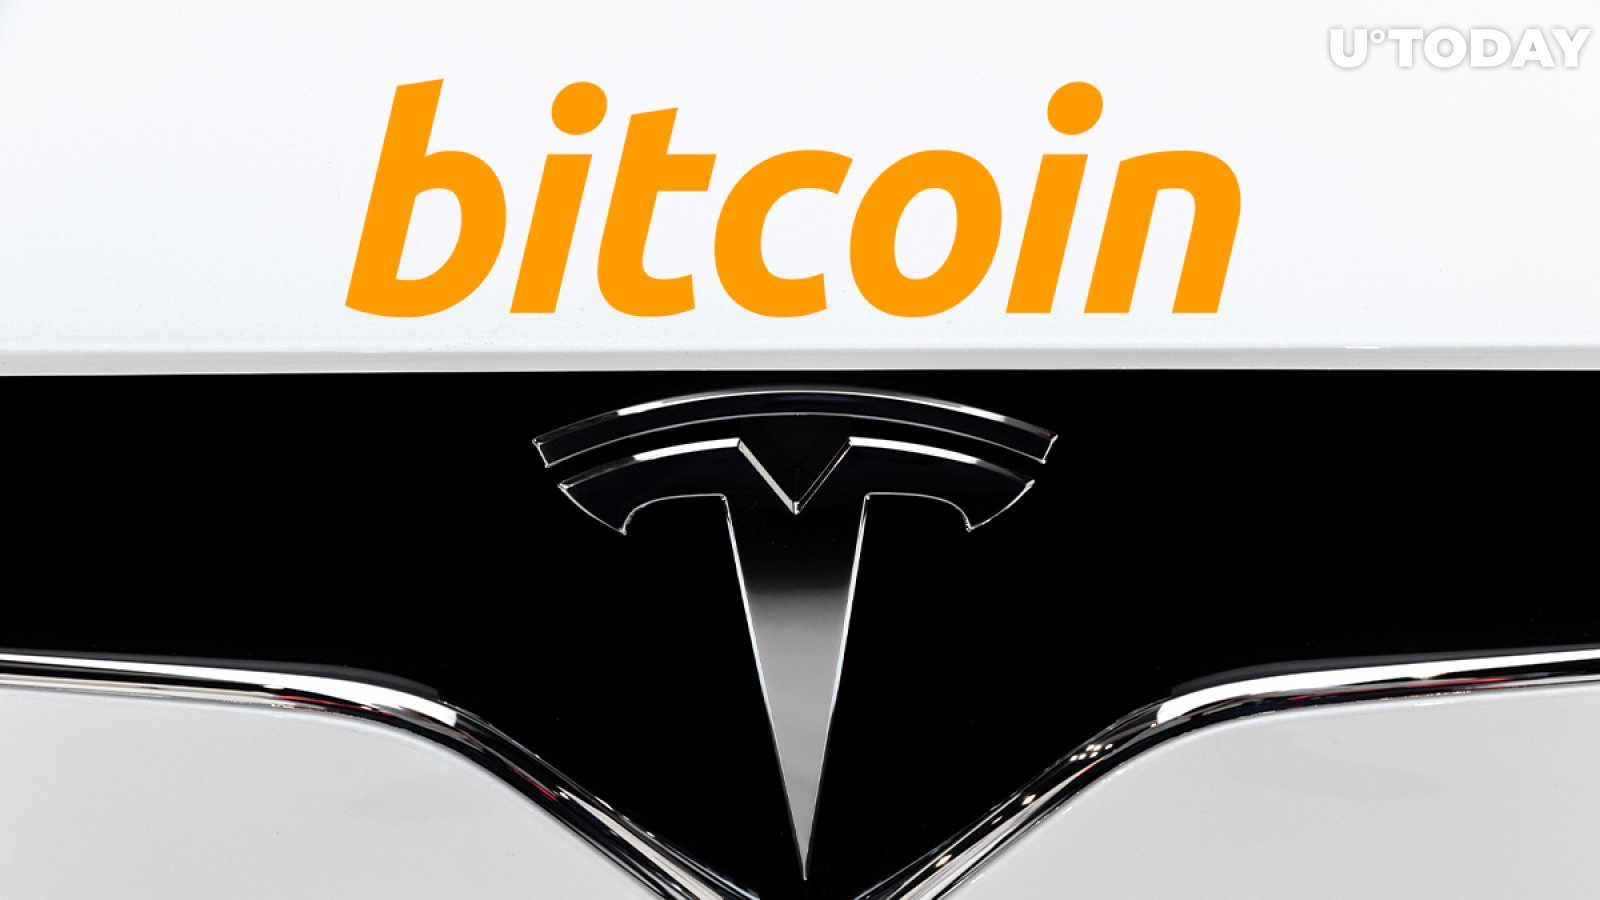 Elon Musk Threatens to Dump All of Tesla's Bitcoin Holdings, Pushing BTC to Multi-Month Low